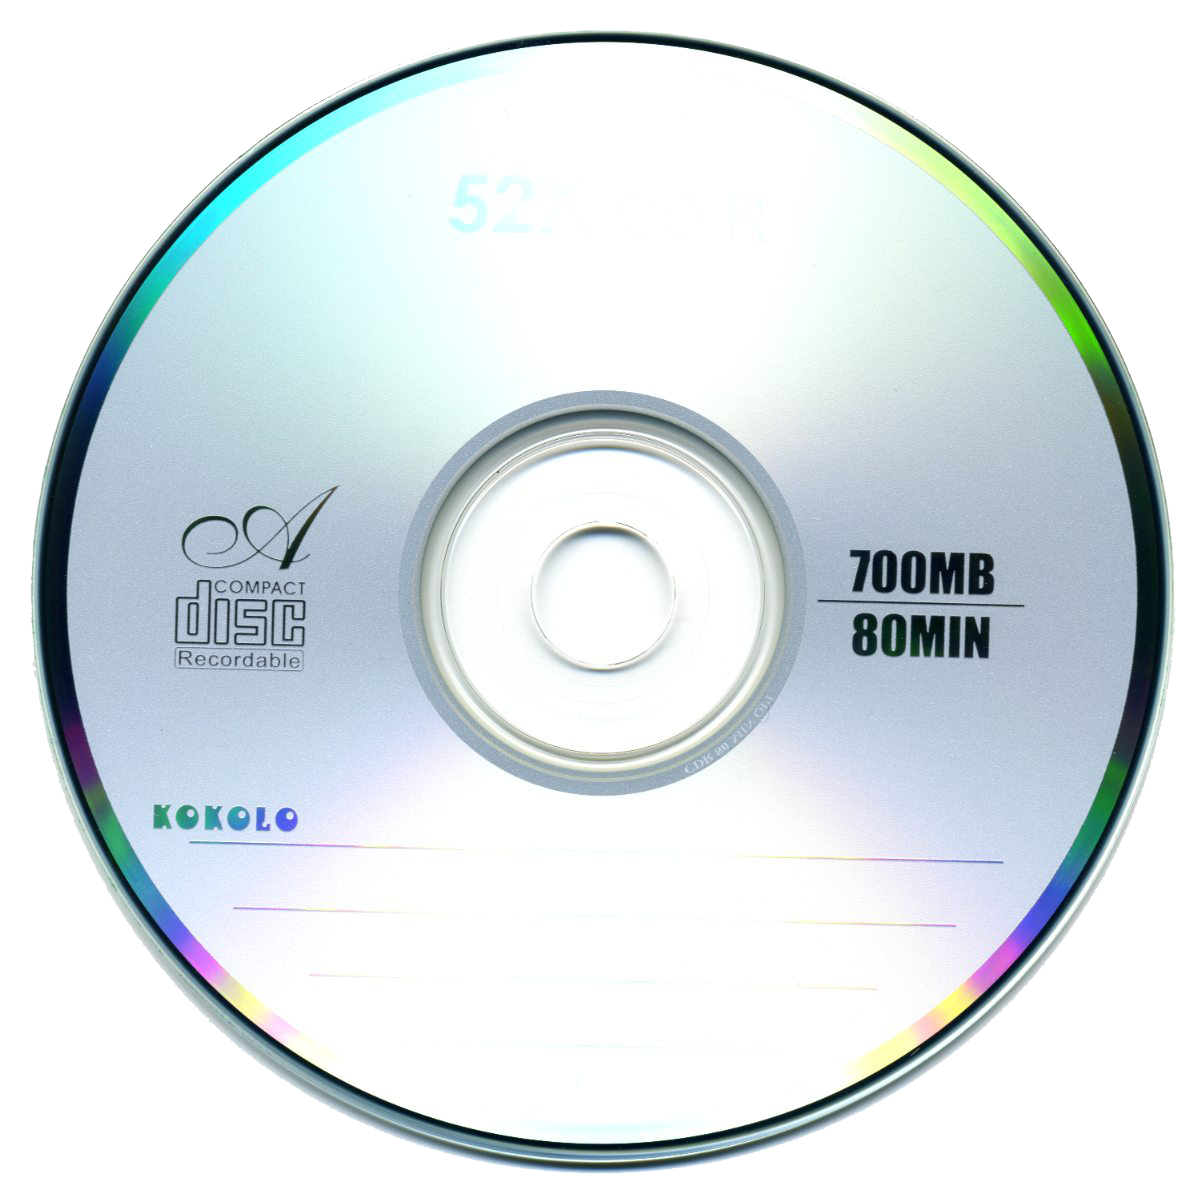 Download PNG image: Compact Cd, DVD disk PNG image